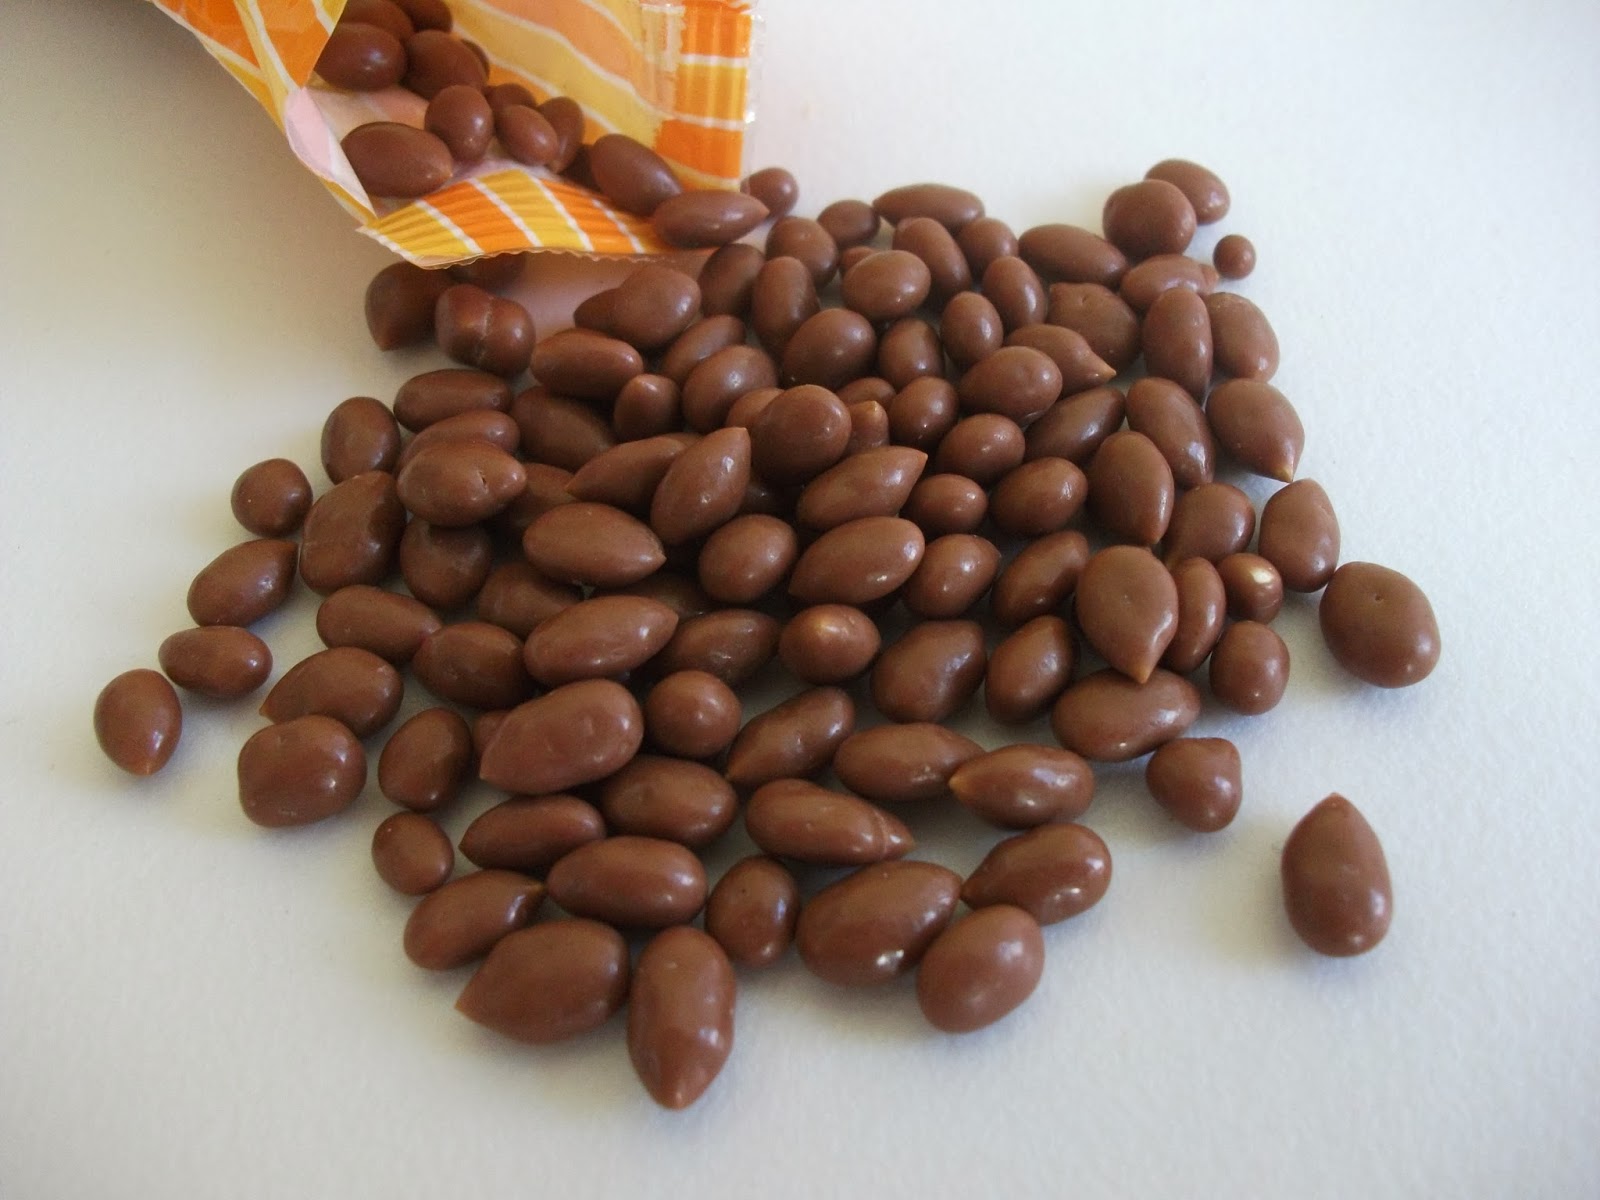 Mister Choc Chocolate Coated Sunflower Seeds (Lidl) - Quick Review1600 x 1200